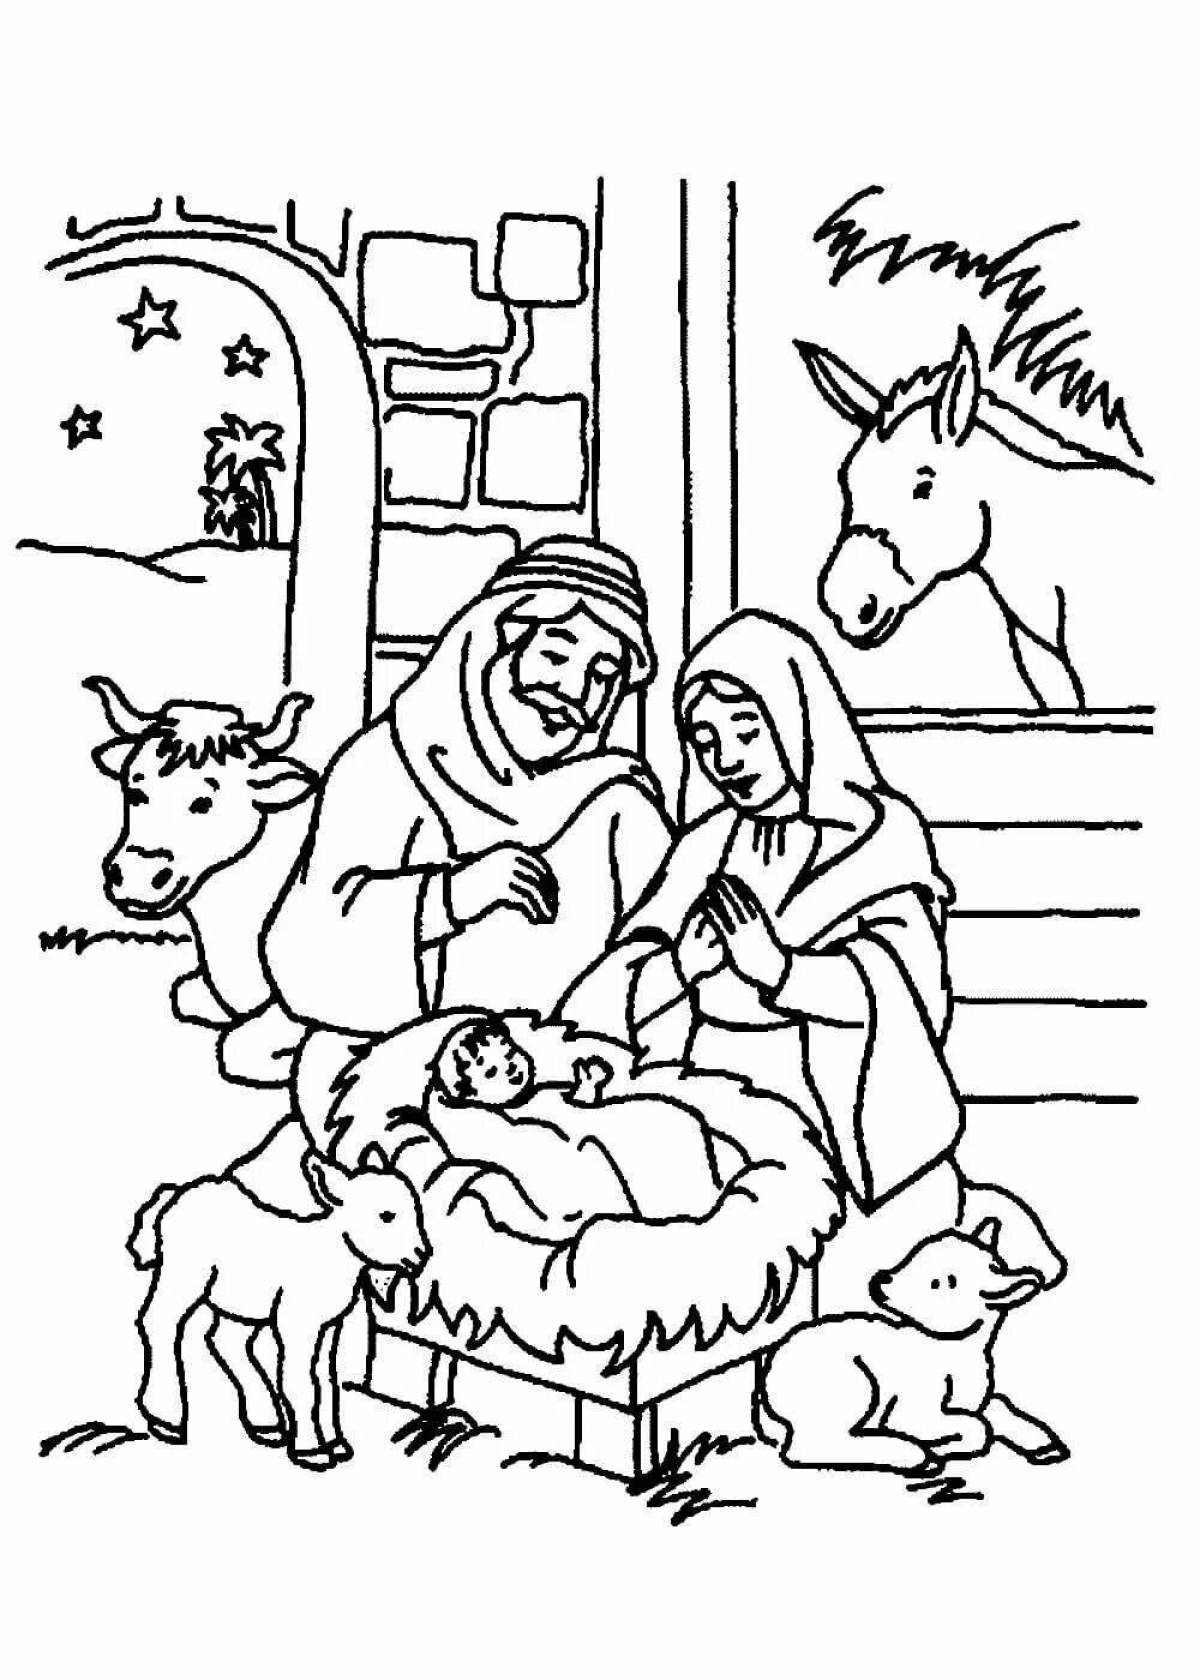 Exquisite jesus in the manger coloring book